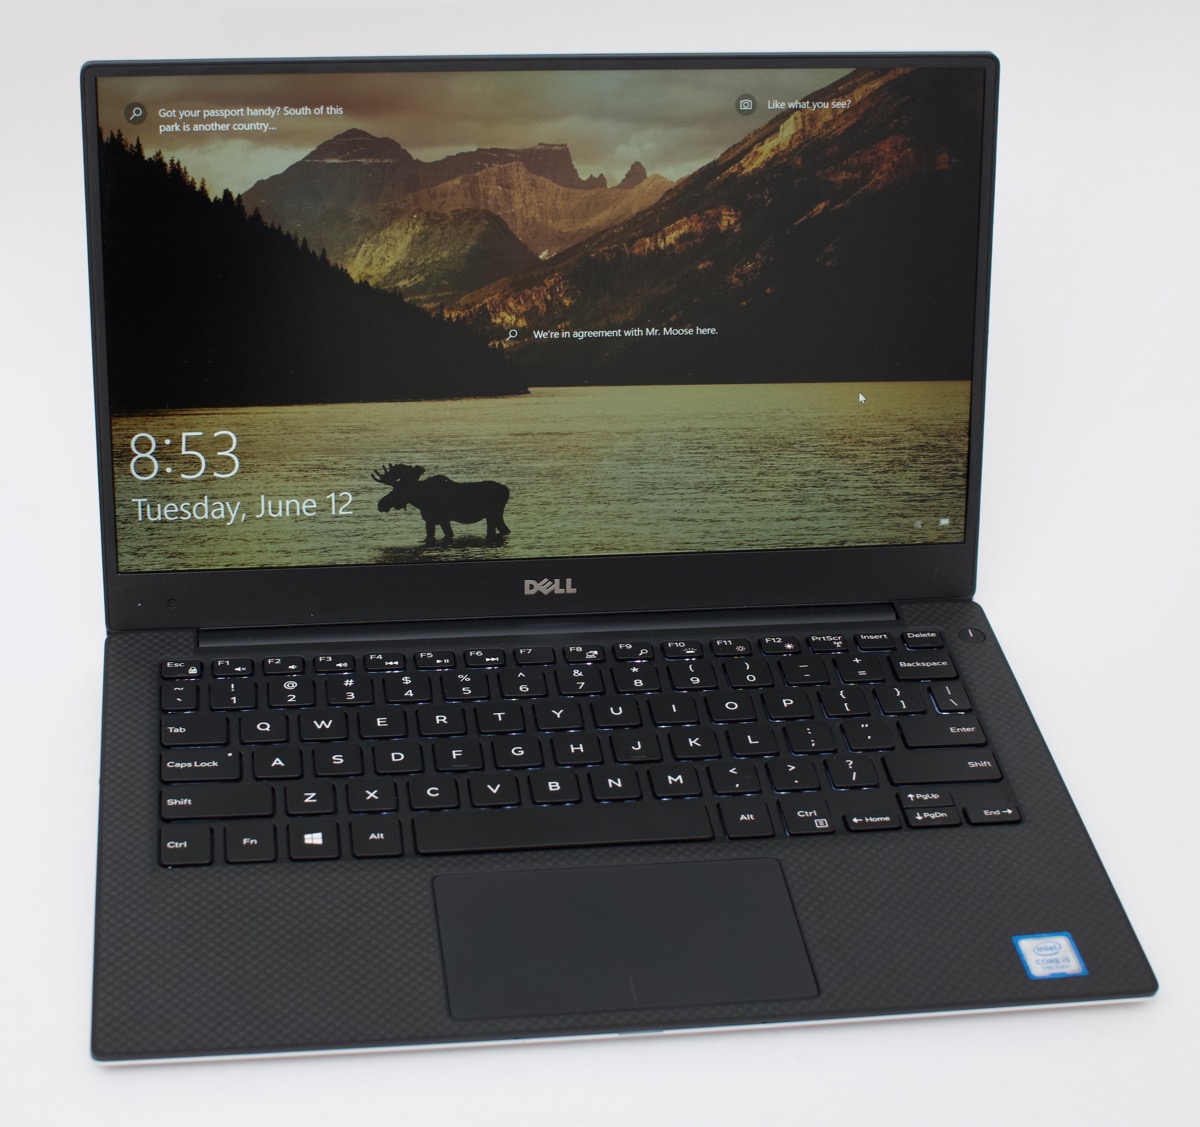 Dell XPS 13 (9360) Review from a lifelong Mac user | Jeff Geerling